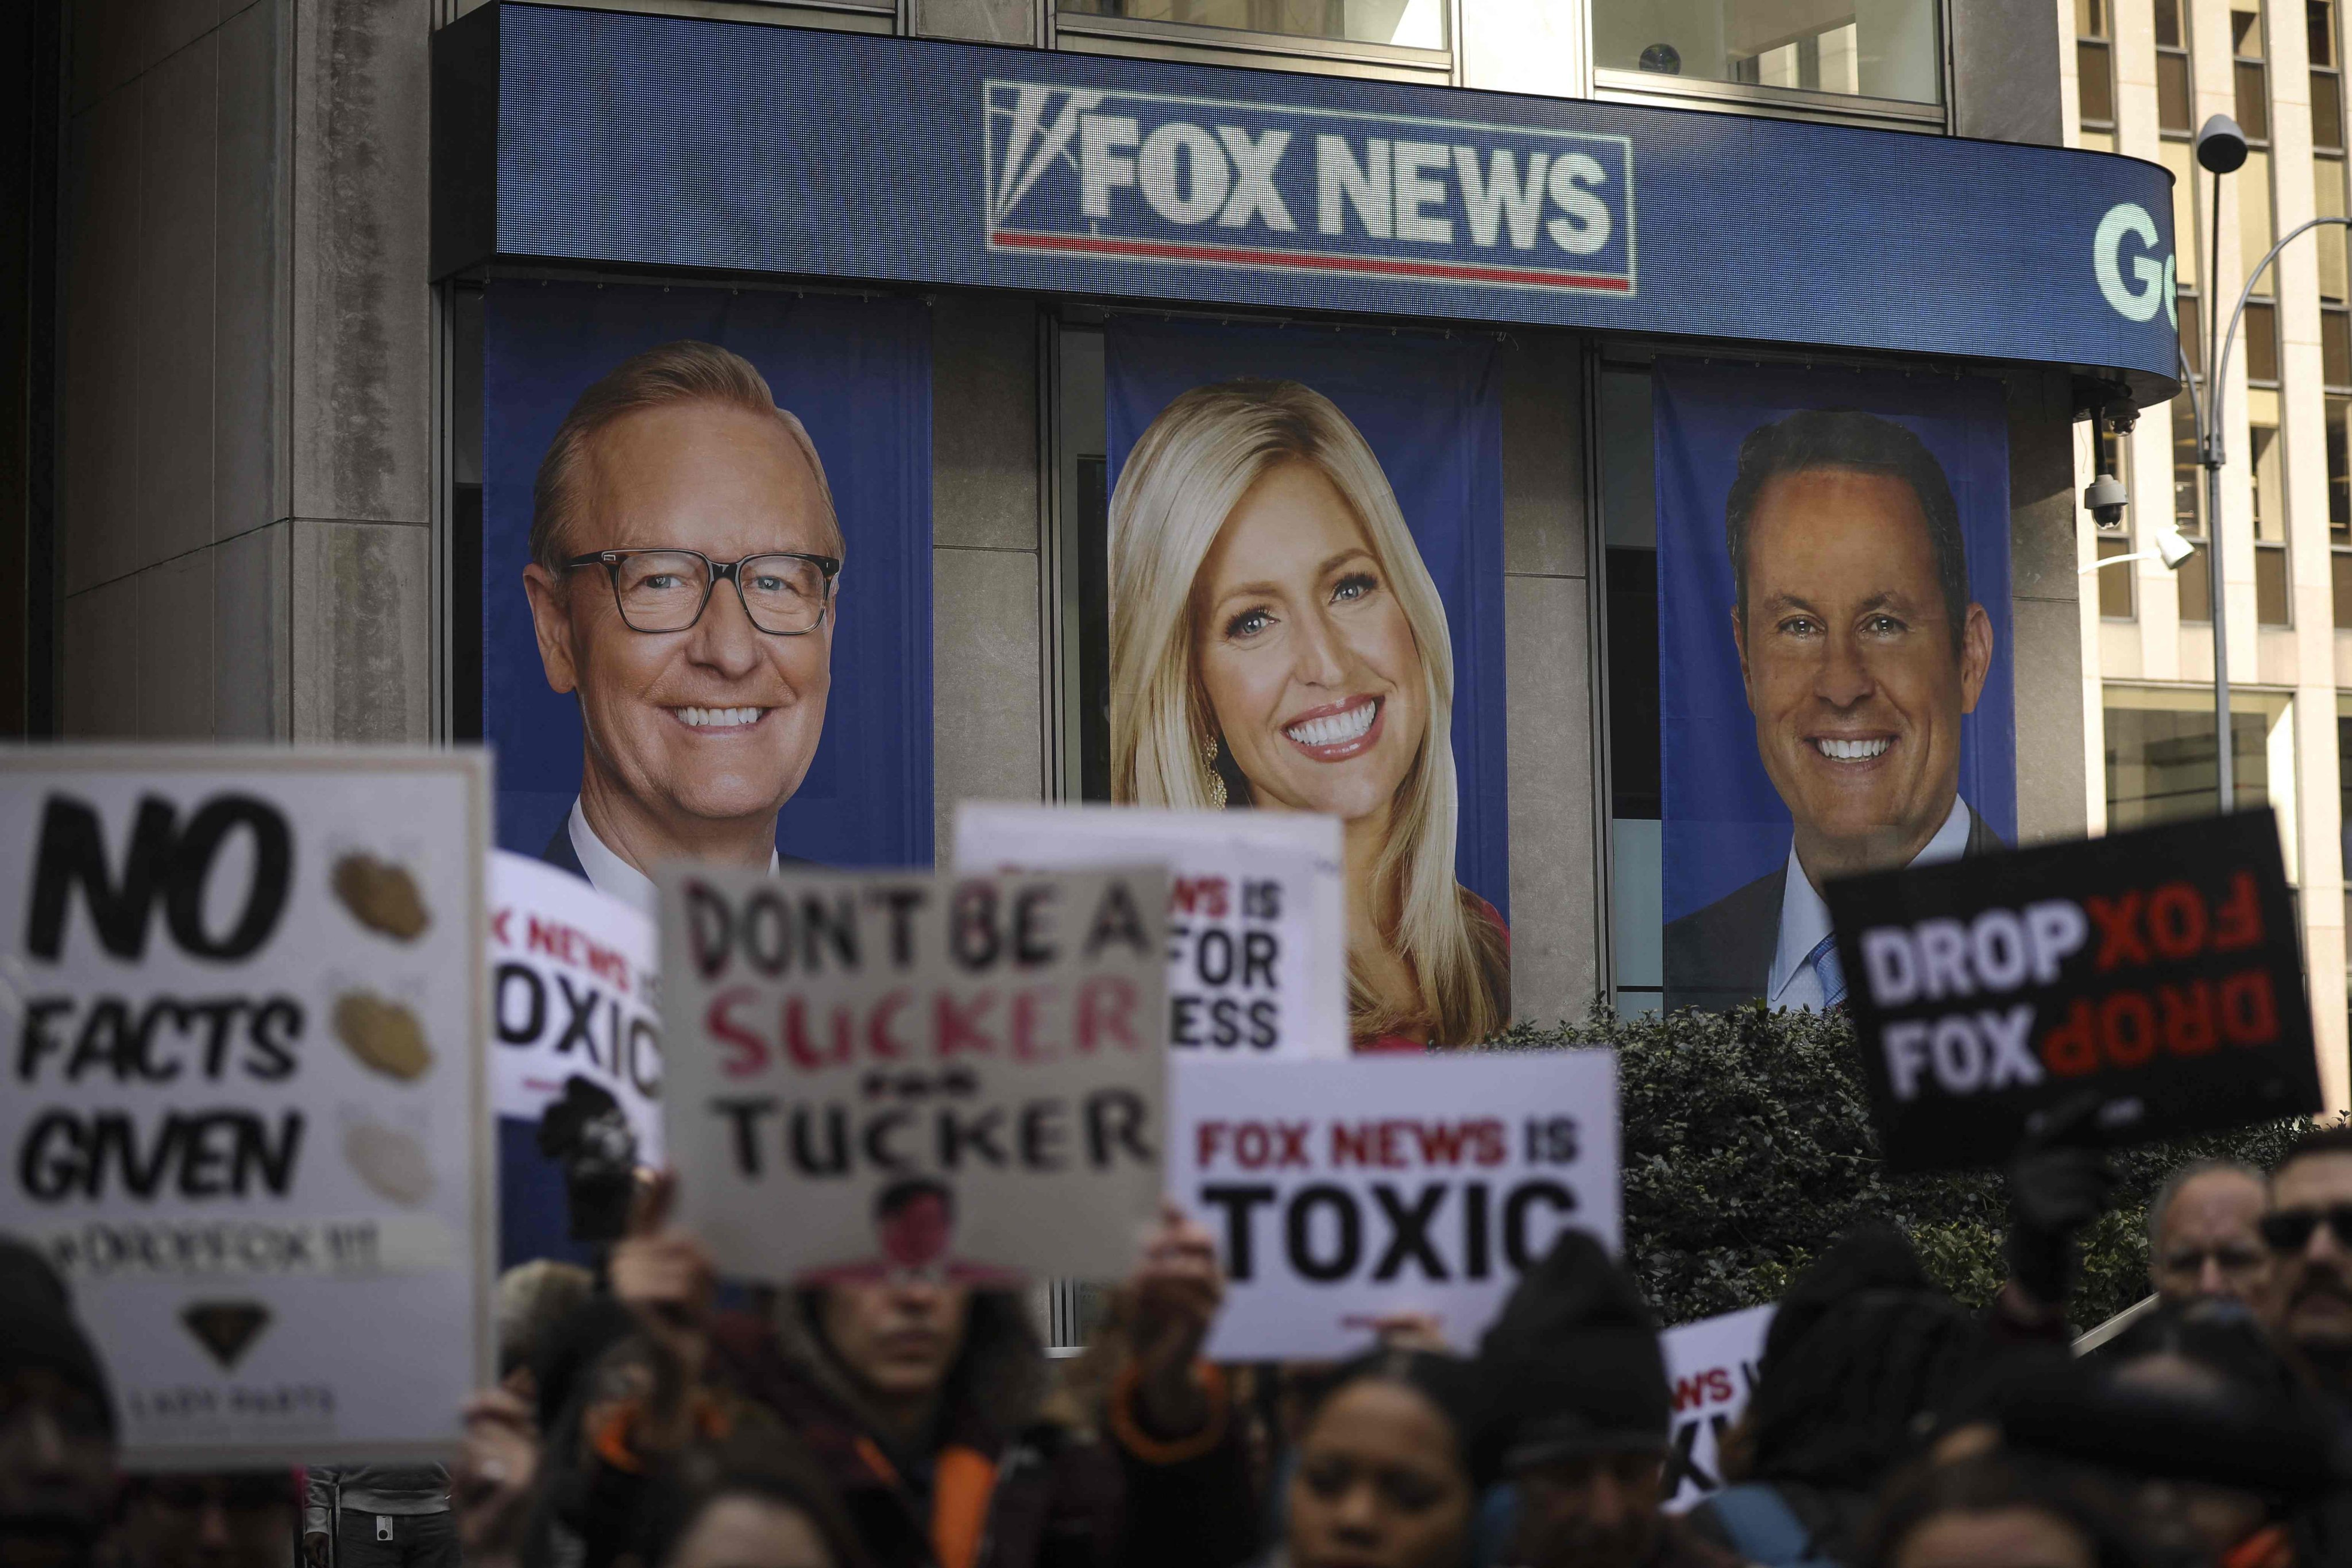 Fox is facing claims by Dominion Voting Systems, which was falsely accused of rigging the 2020 election against Donald Trump. File photo: AFP